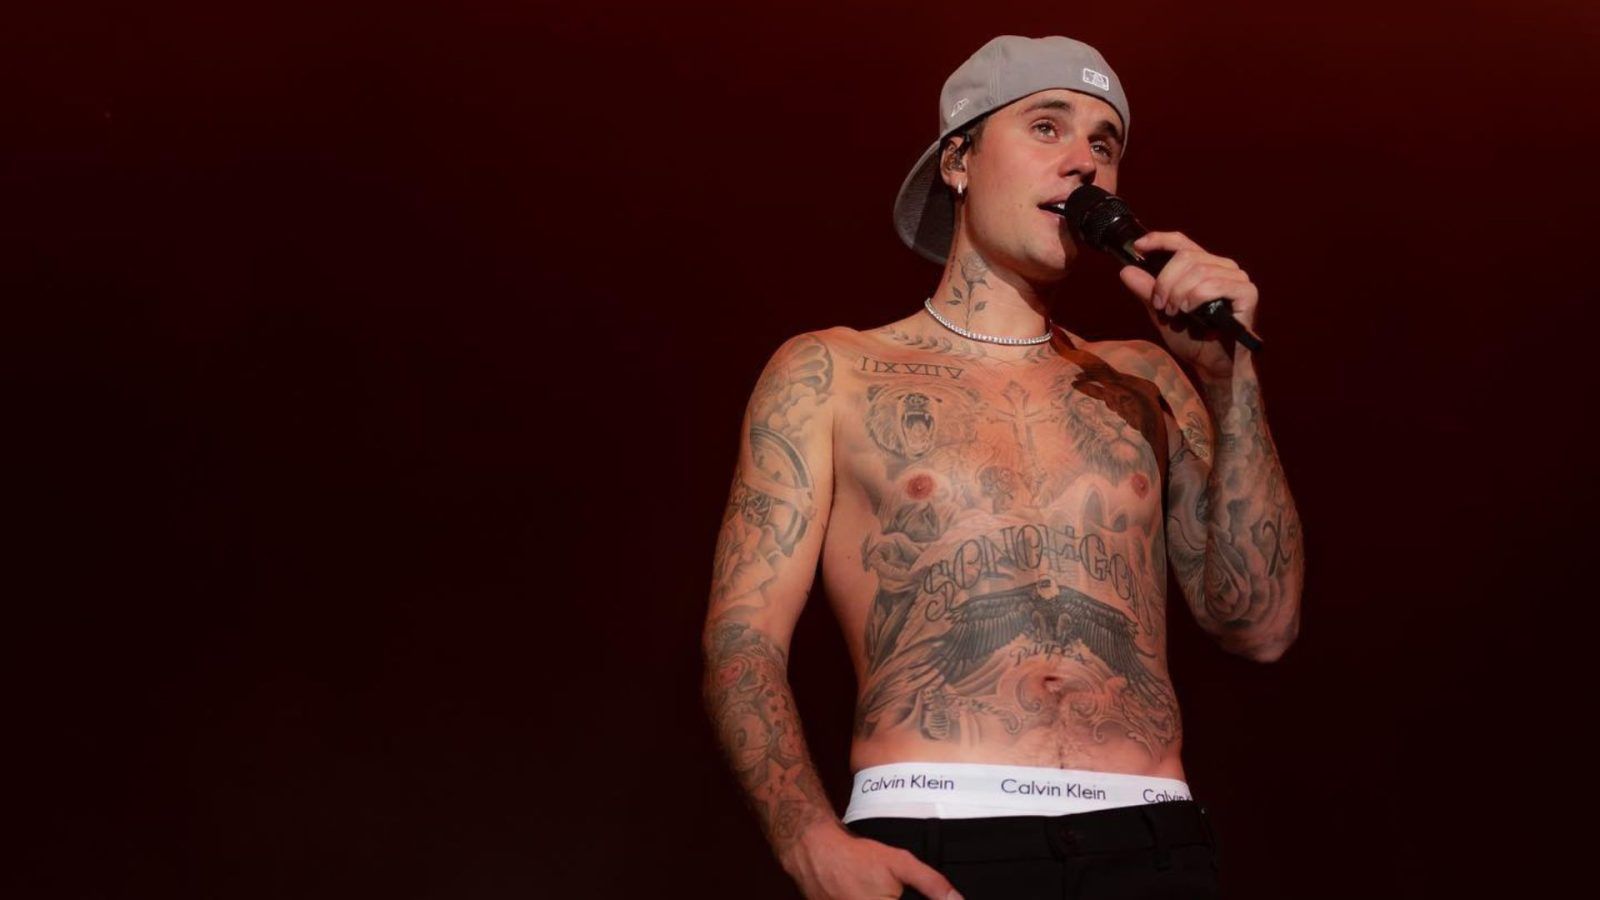 Justin Bieber's brand launches its first product: 'cheap hotel